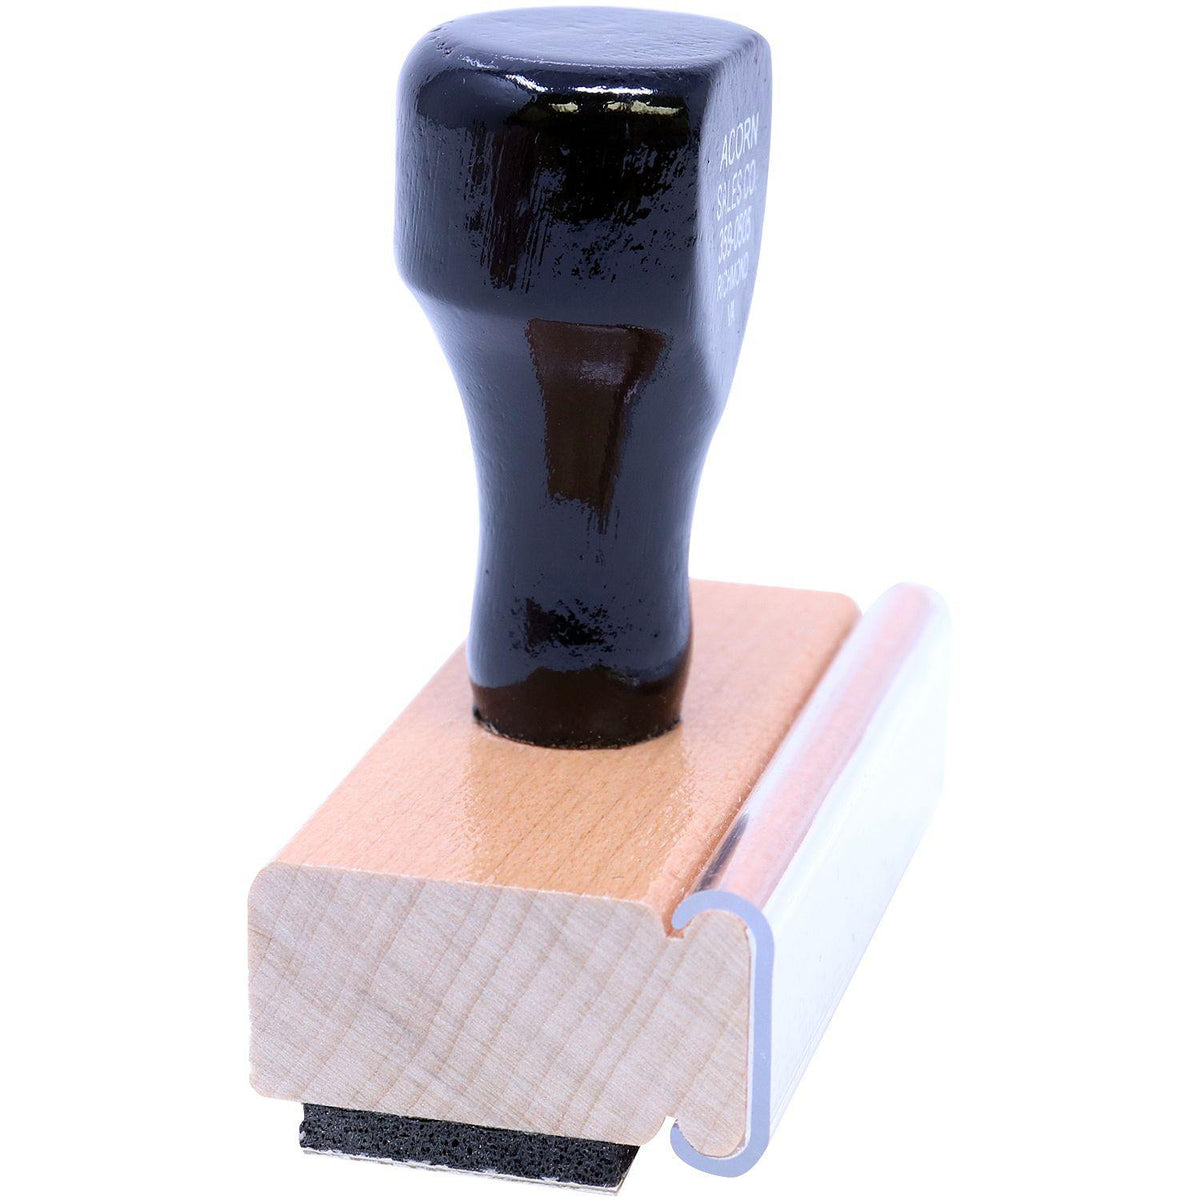 Side View of Large Dismissal Rubber Stamp at an Angle